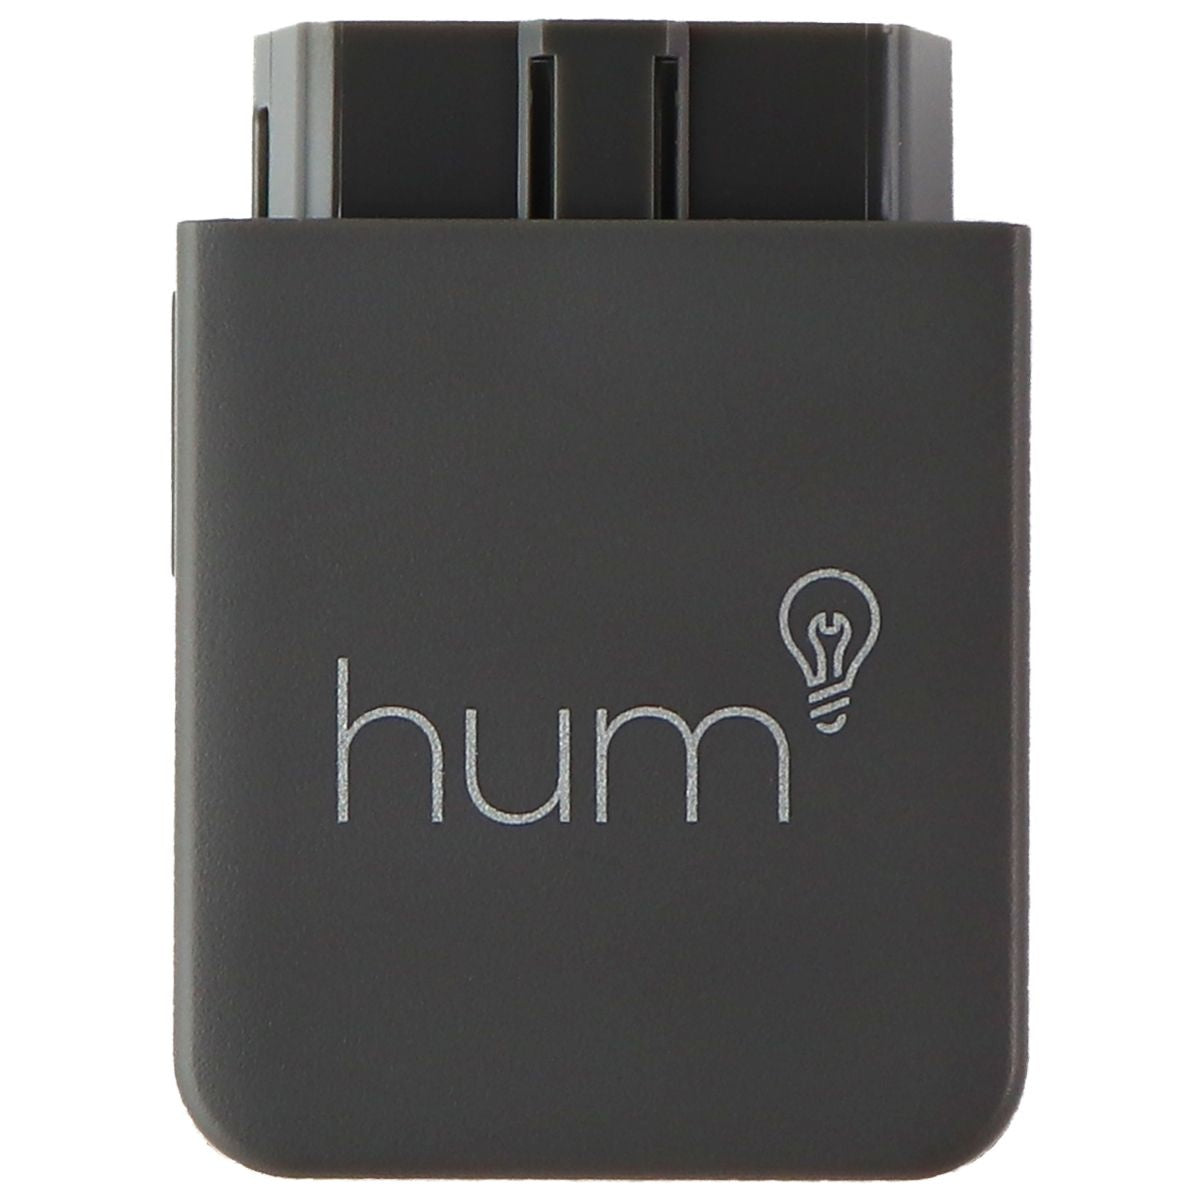 Hum+ (Gen 2) Telematics OBD Reader from Verizon - Gray (VZ-0410-001-US) Car Video - Other Vehicle Electronics Hum    - Simple Cell Bulk Wholesale Pricing - USA Seller